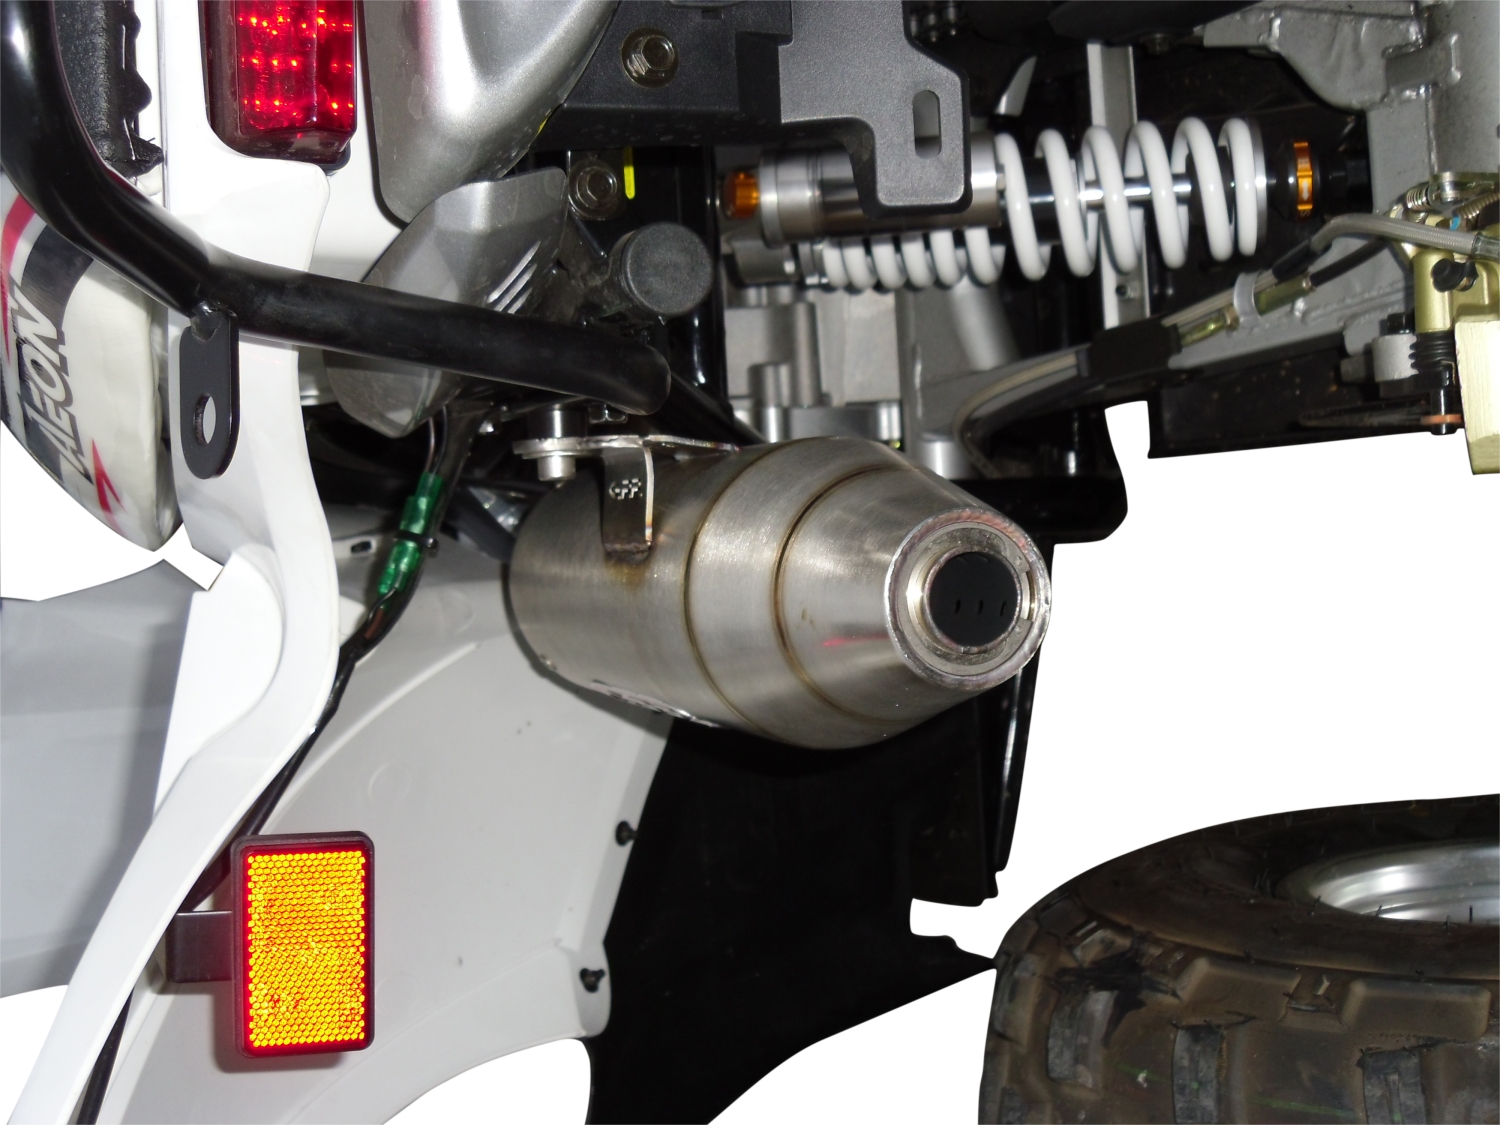 Exhaust system compatible with Aeon Cobra 400 2010-2021, Deeptone Atv, Homologated legal full system exhaust, including removable db killer 